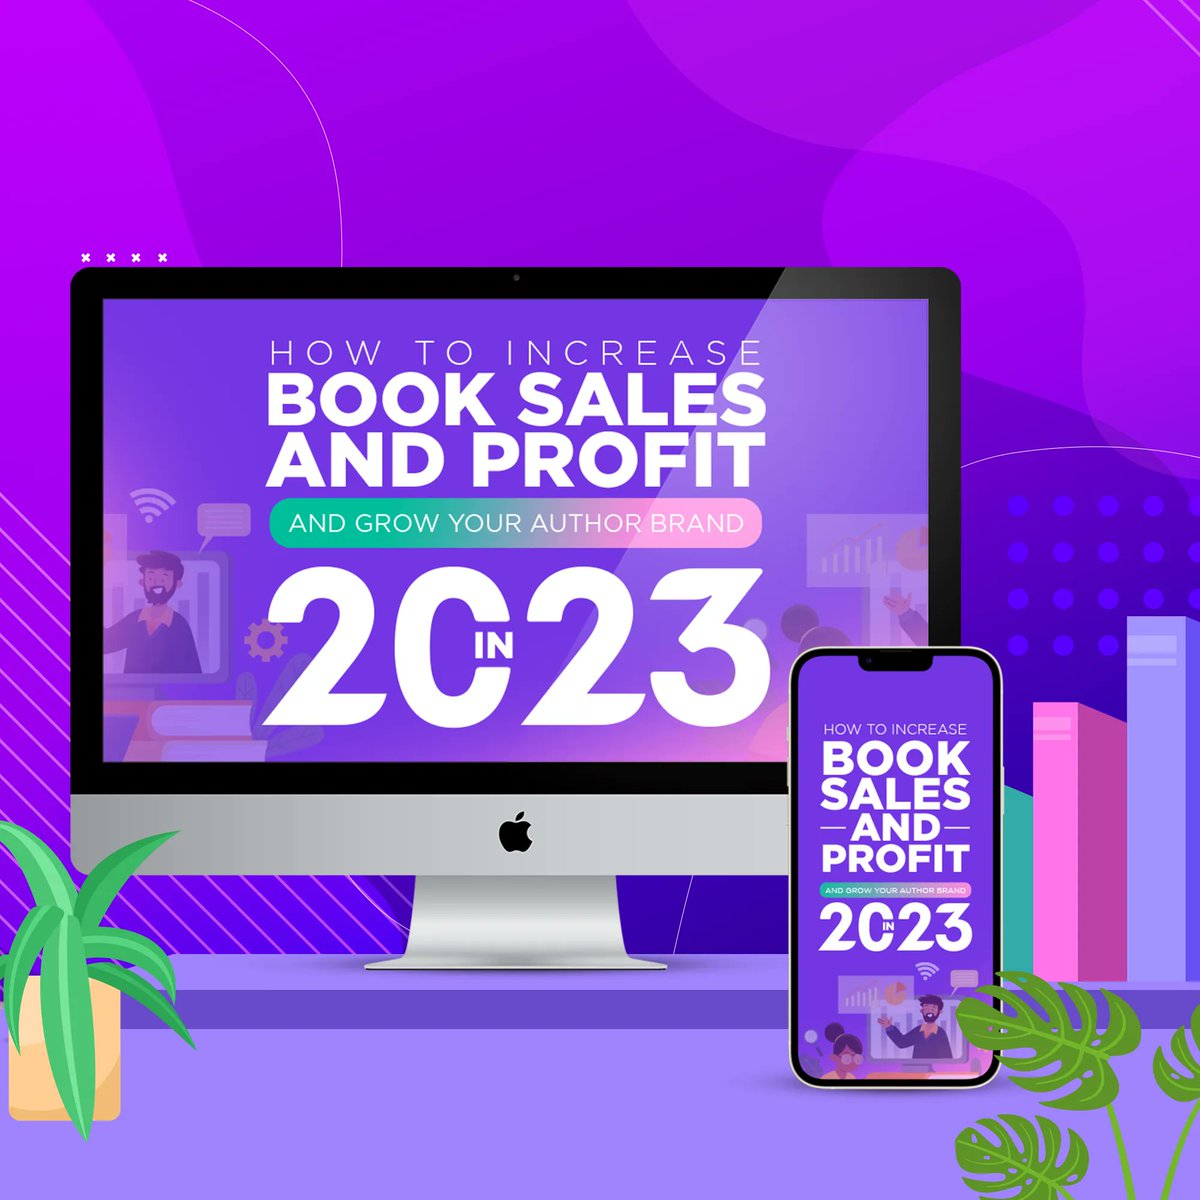 Tired of getting little to no results from your book marketing? Check out what Tom Morkes suggests in the upcoming webinar How to Increase Book Sales and Profit on March 7 at 4 pm EST. buff.ly/41o170n #authors #authorpreneur #booksales #writerstips #toolsforwriters